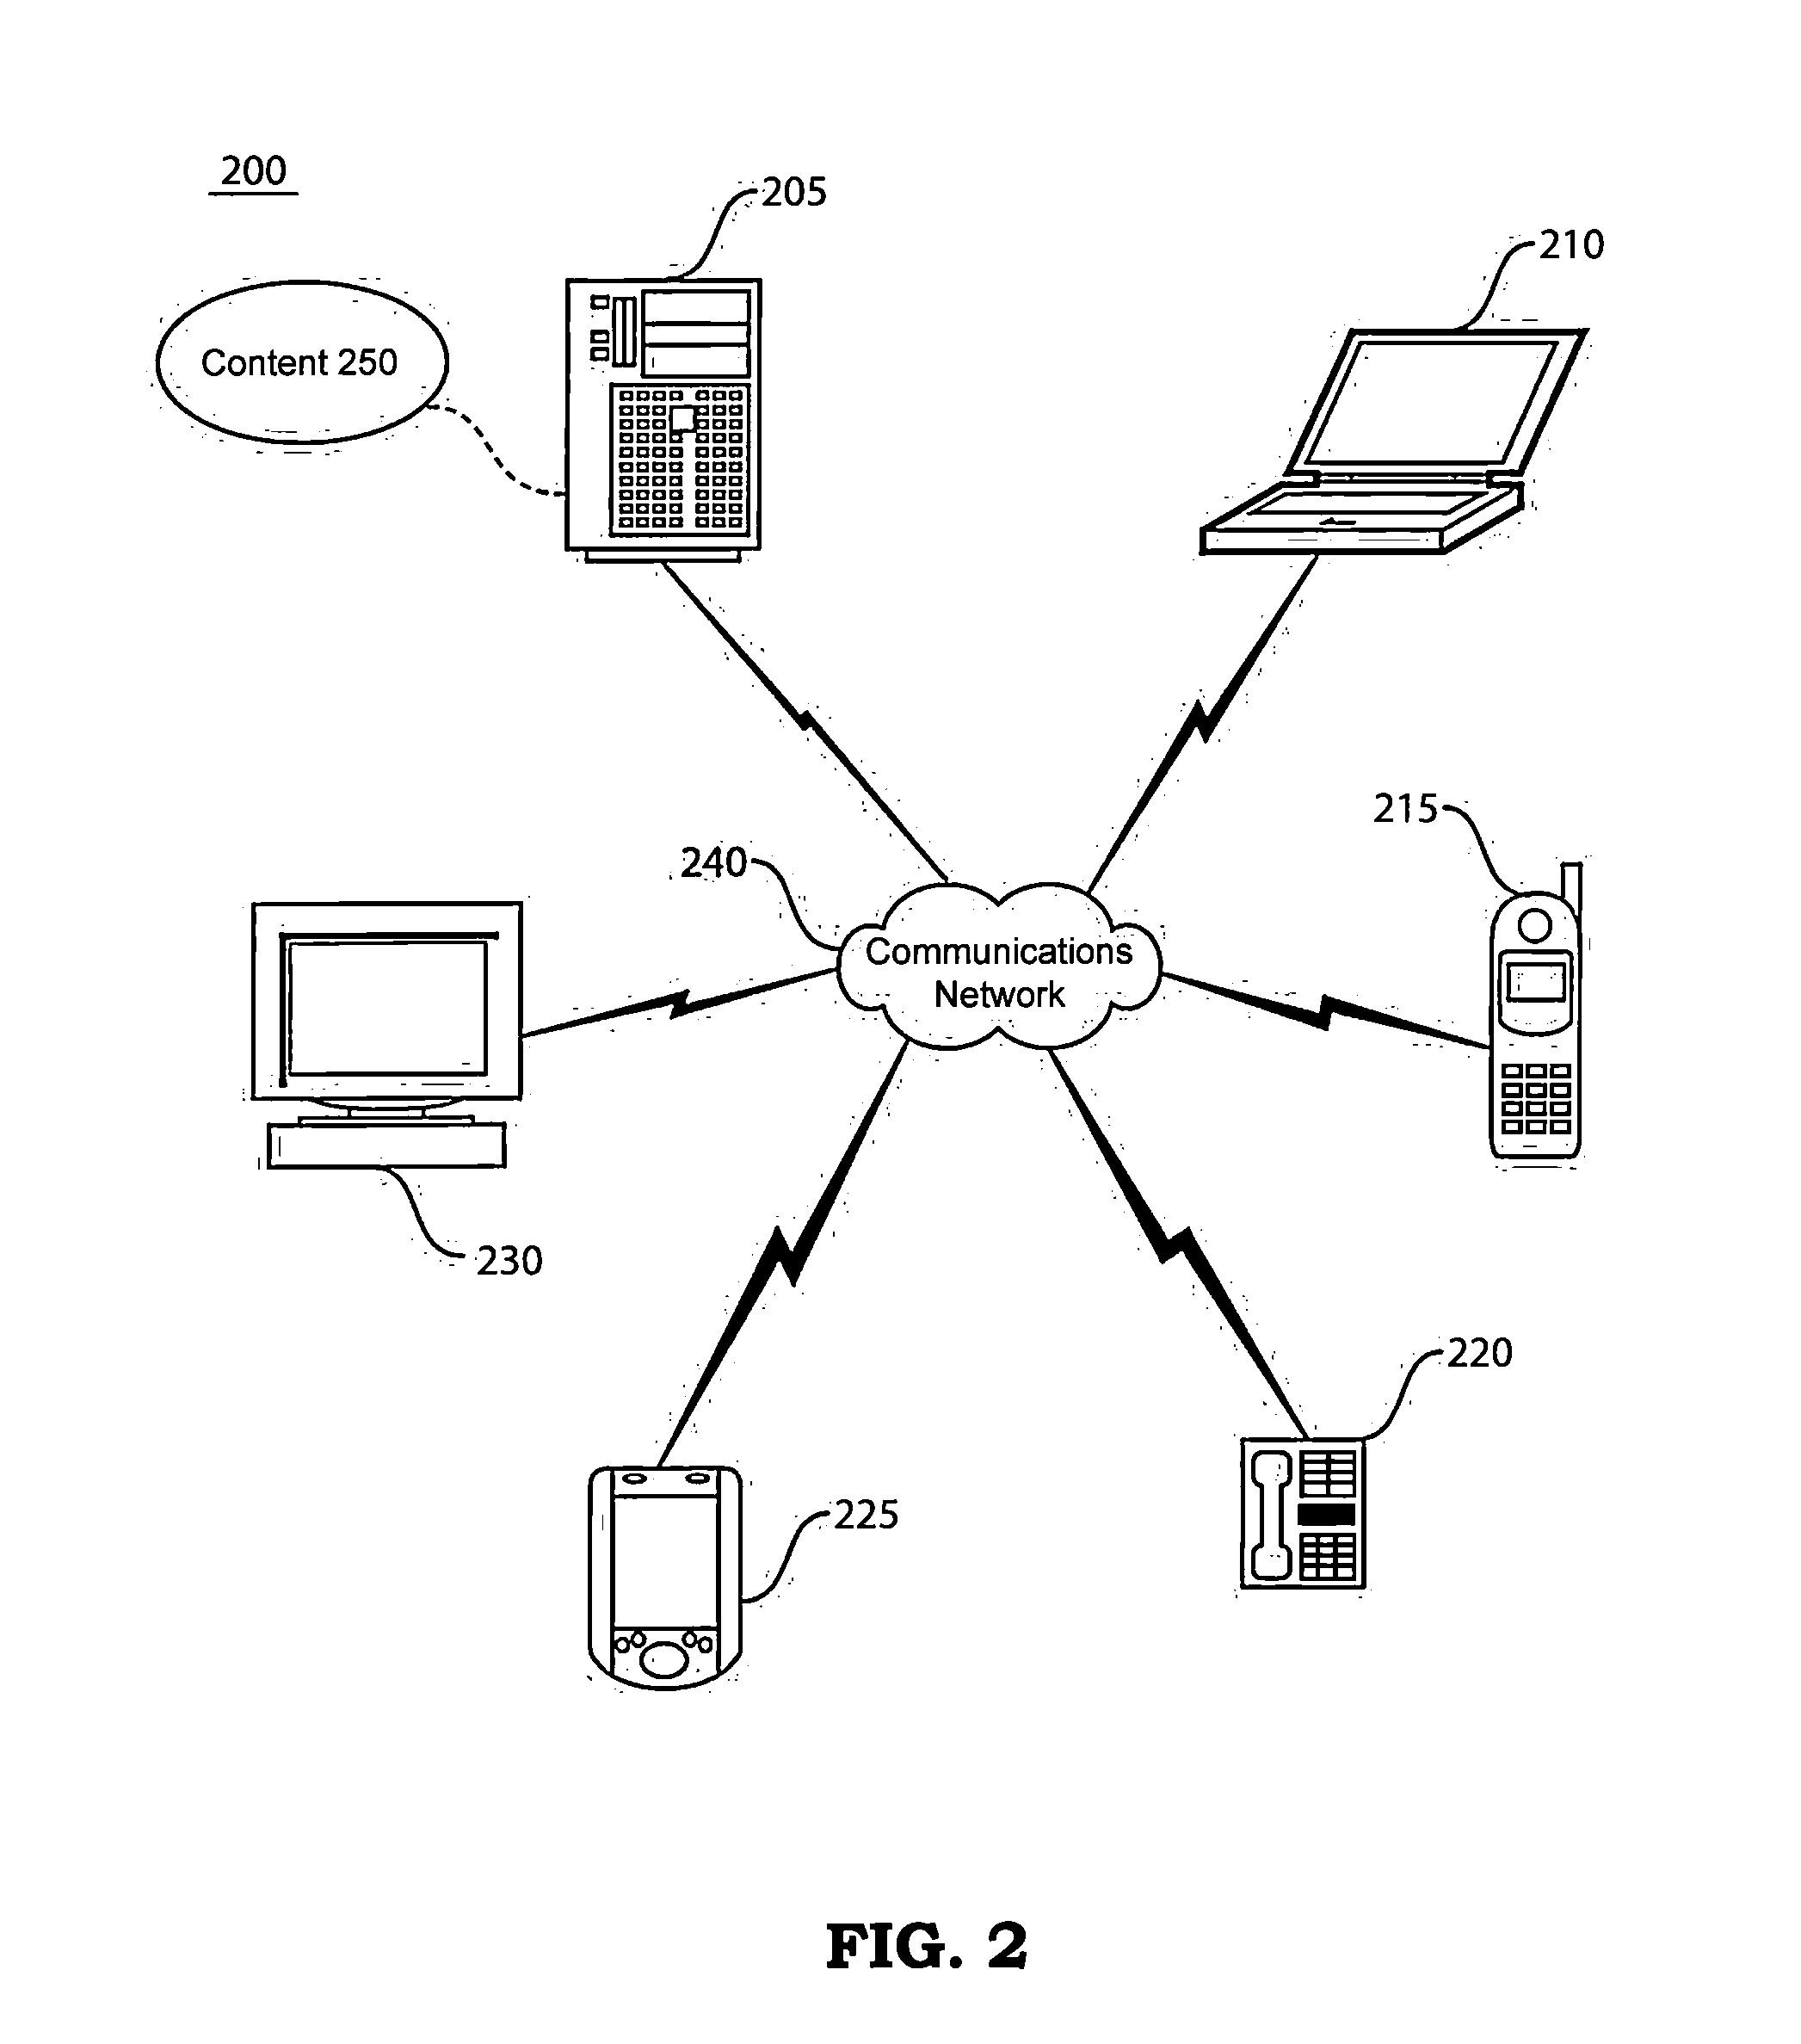 Engine, system and method of providing vertical social networks for client oriented service providers